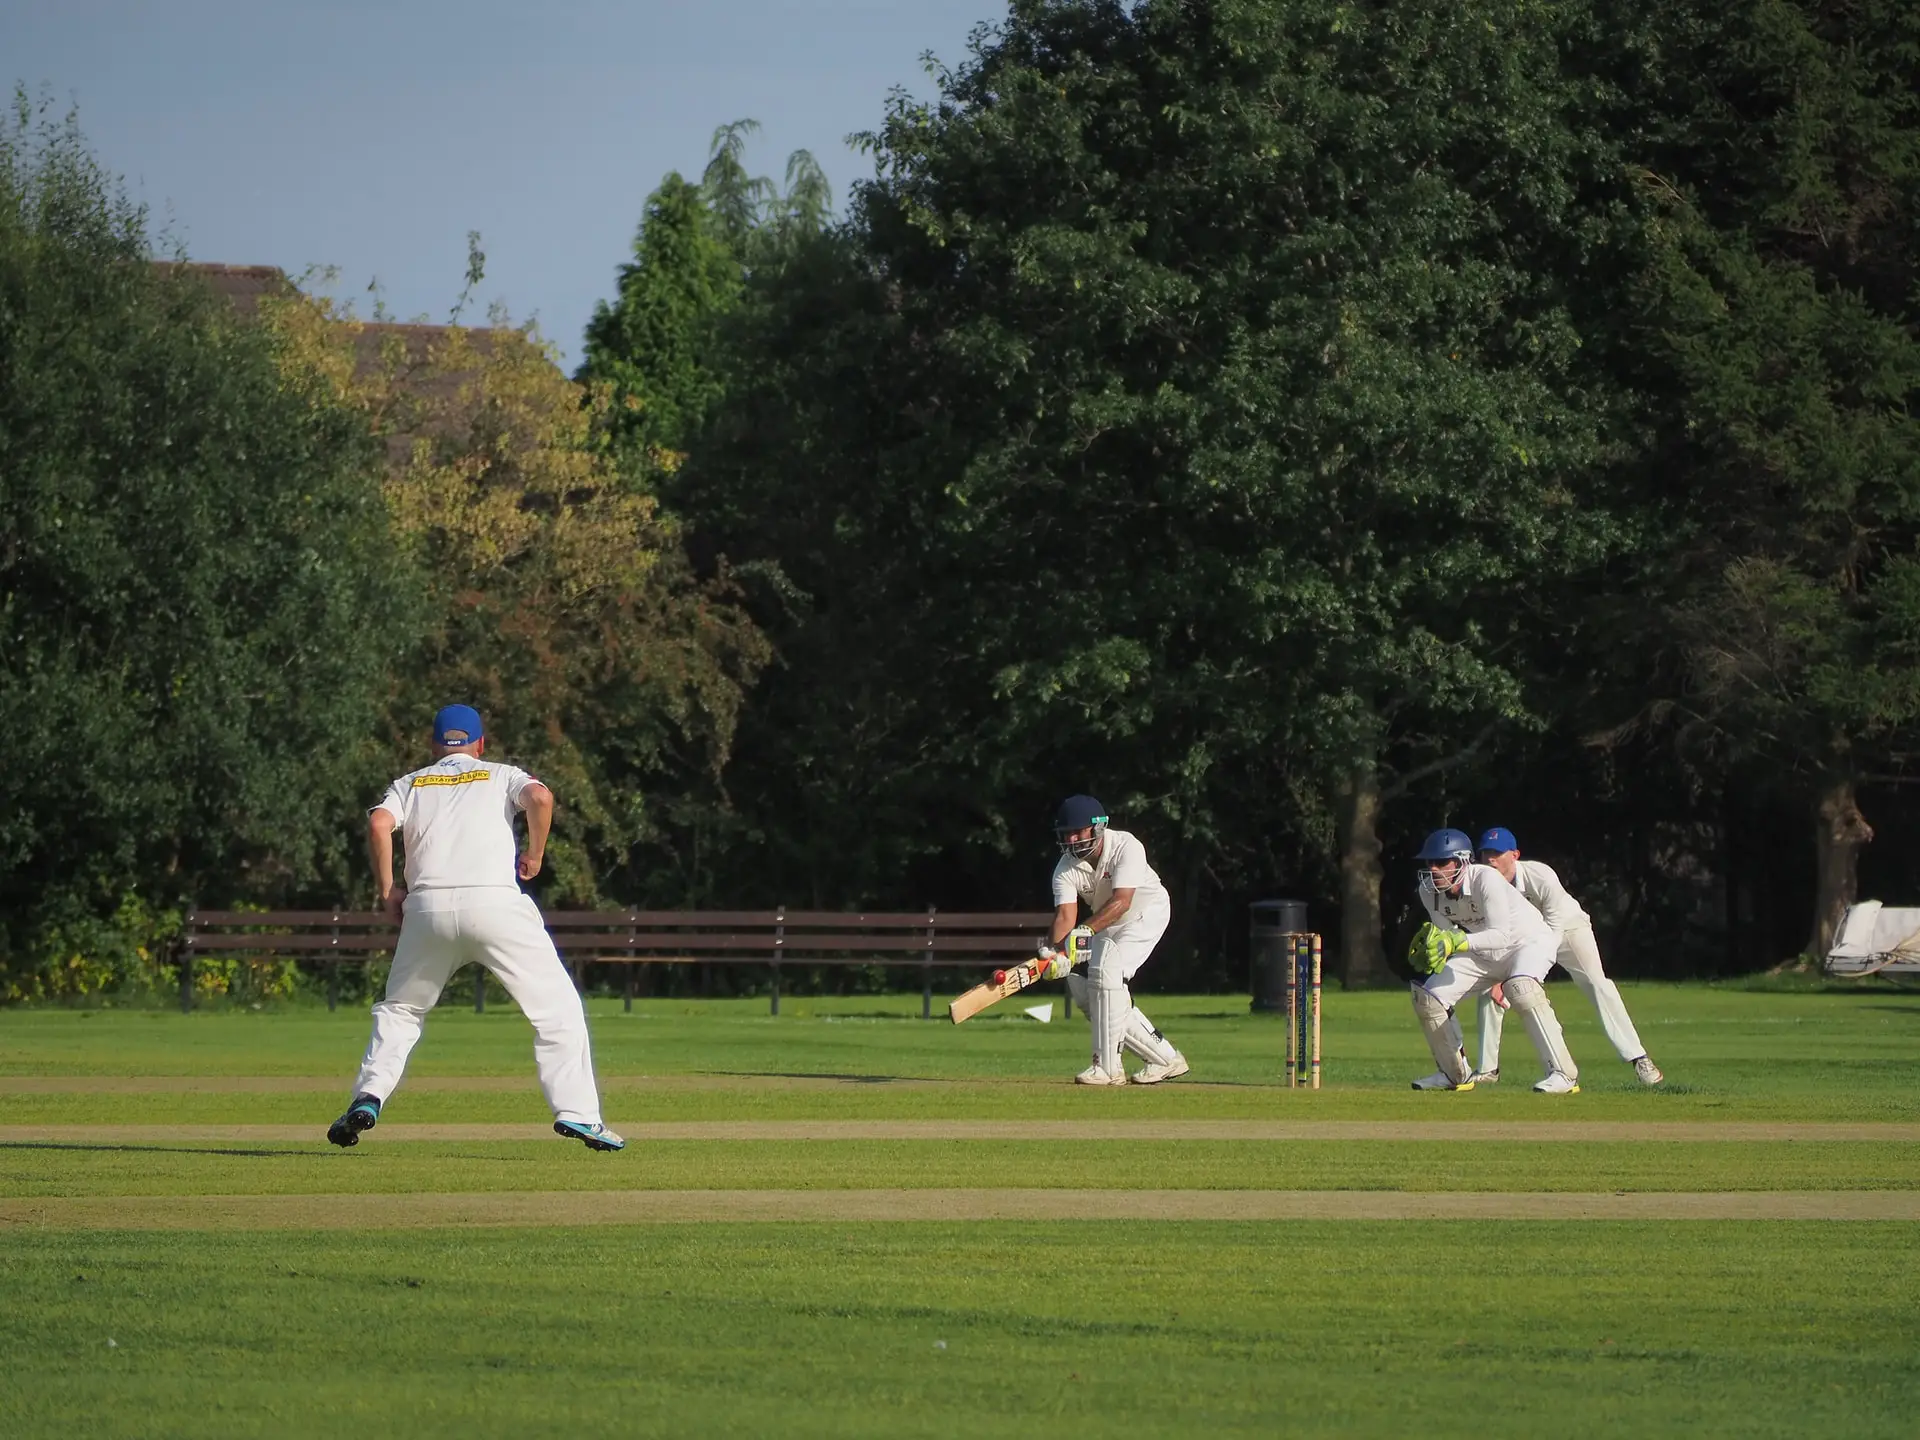 Bristol Cricket Club Partners with Virti to Deploy VR for Training Players